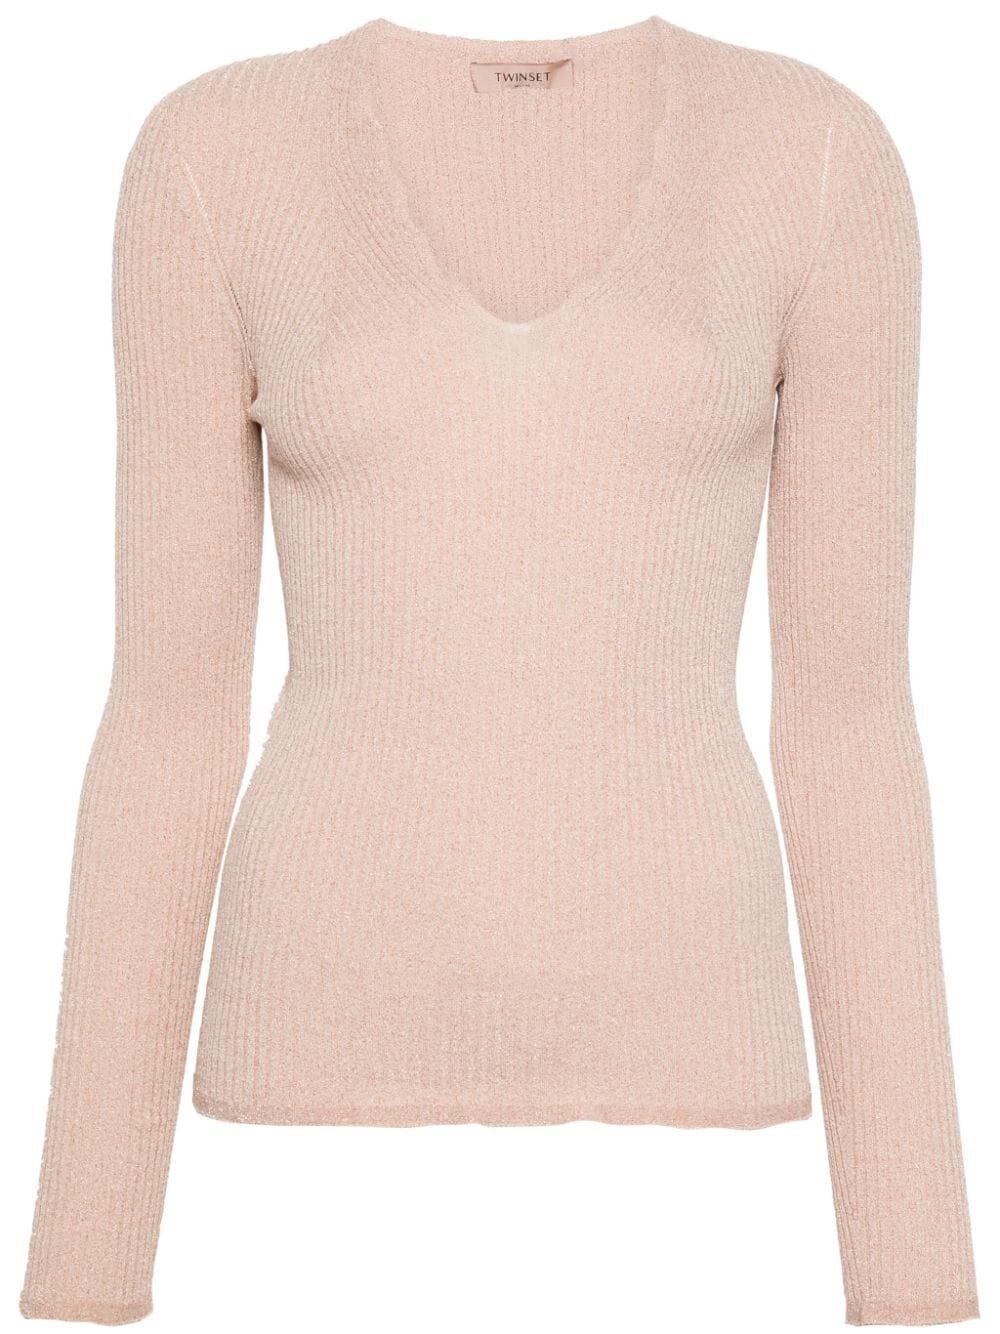 Twinset Ribbed Knit Jumper In Pink & Purple